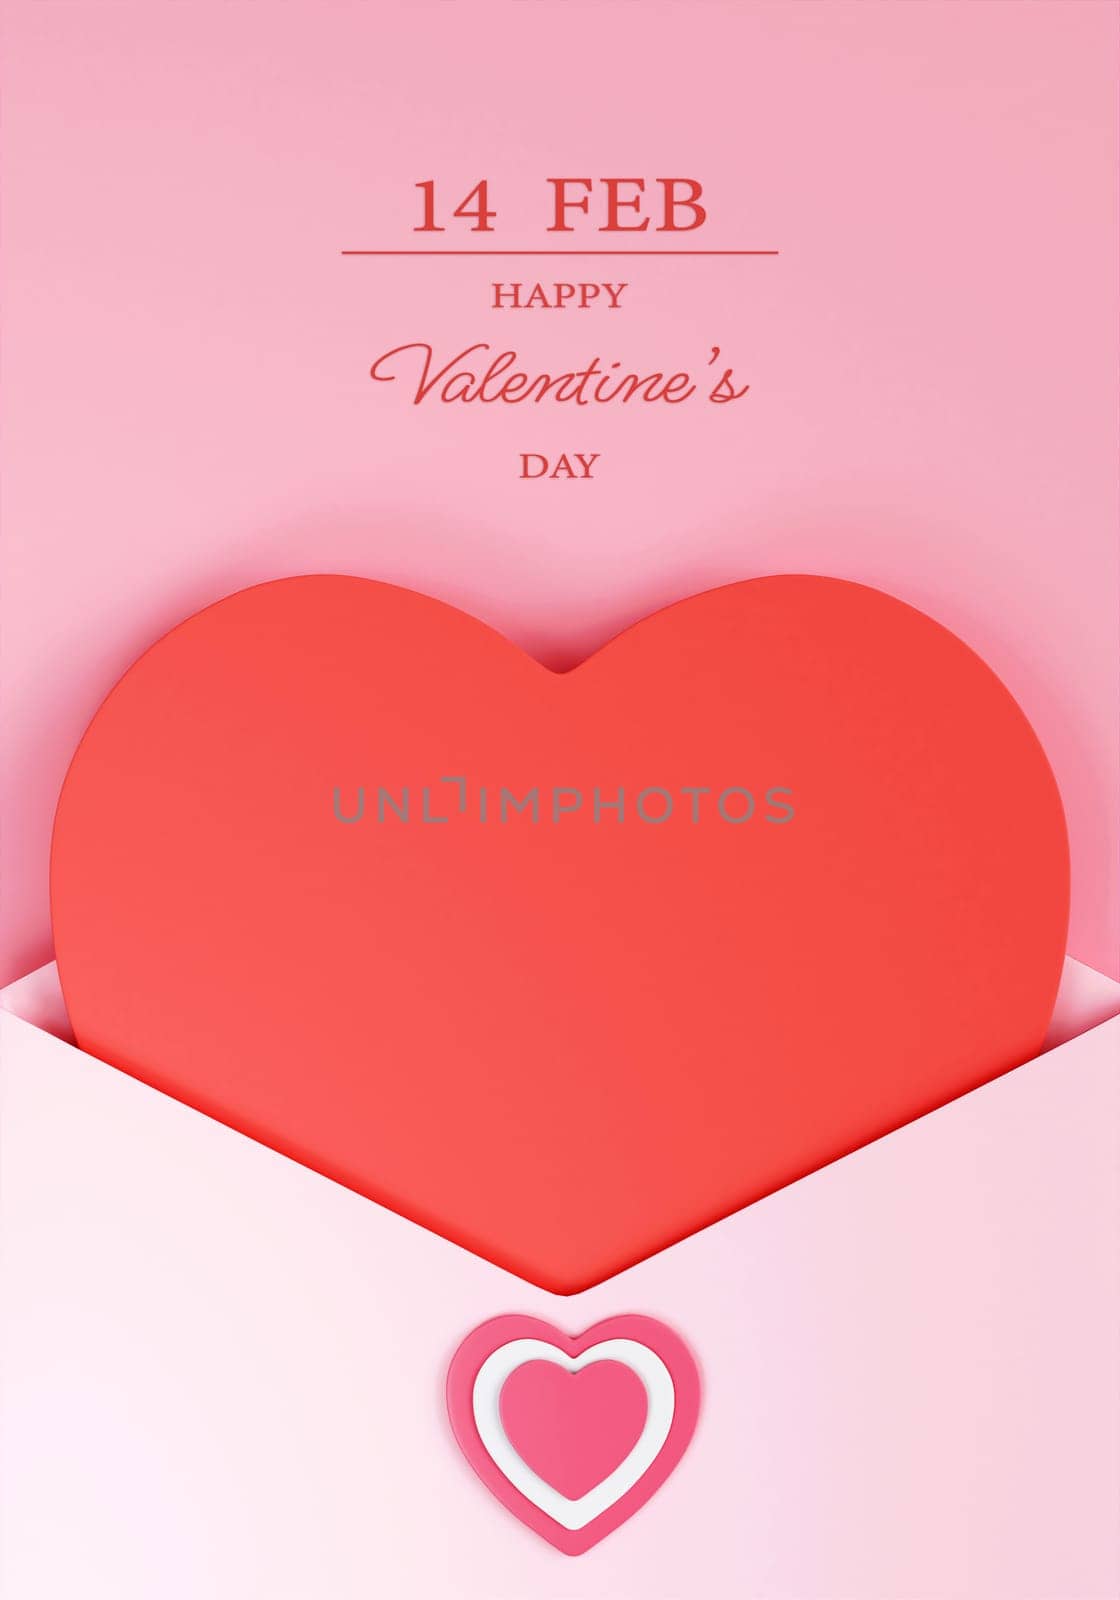 Happy Valentine's Day poster. Holiday background with red heart and pink envelope. 3D rendering illustration by meepiangraphic